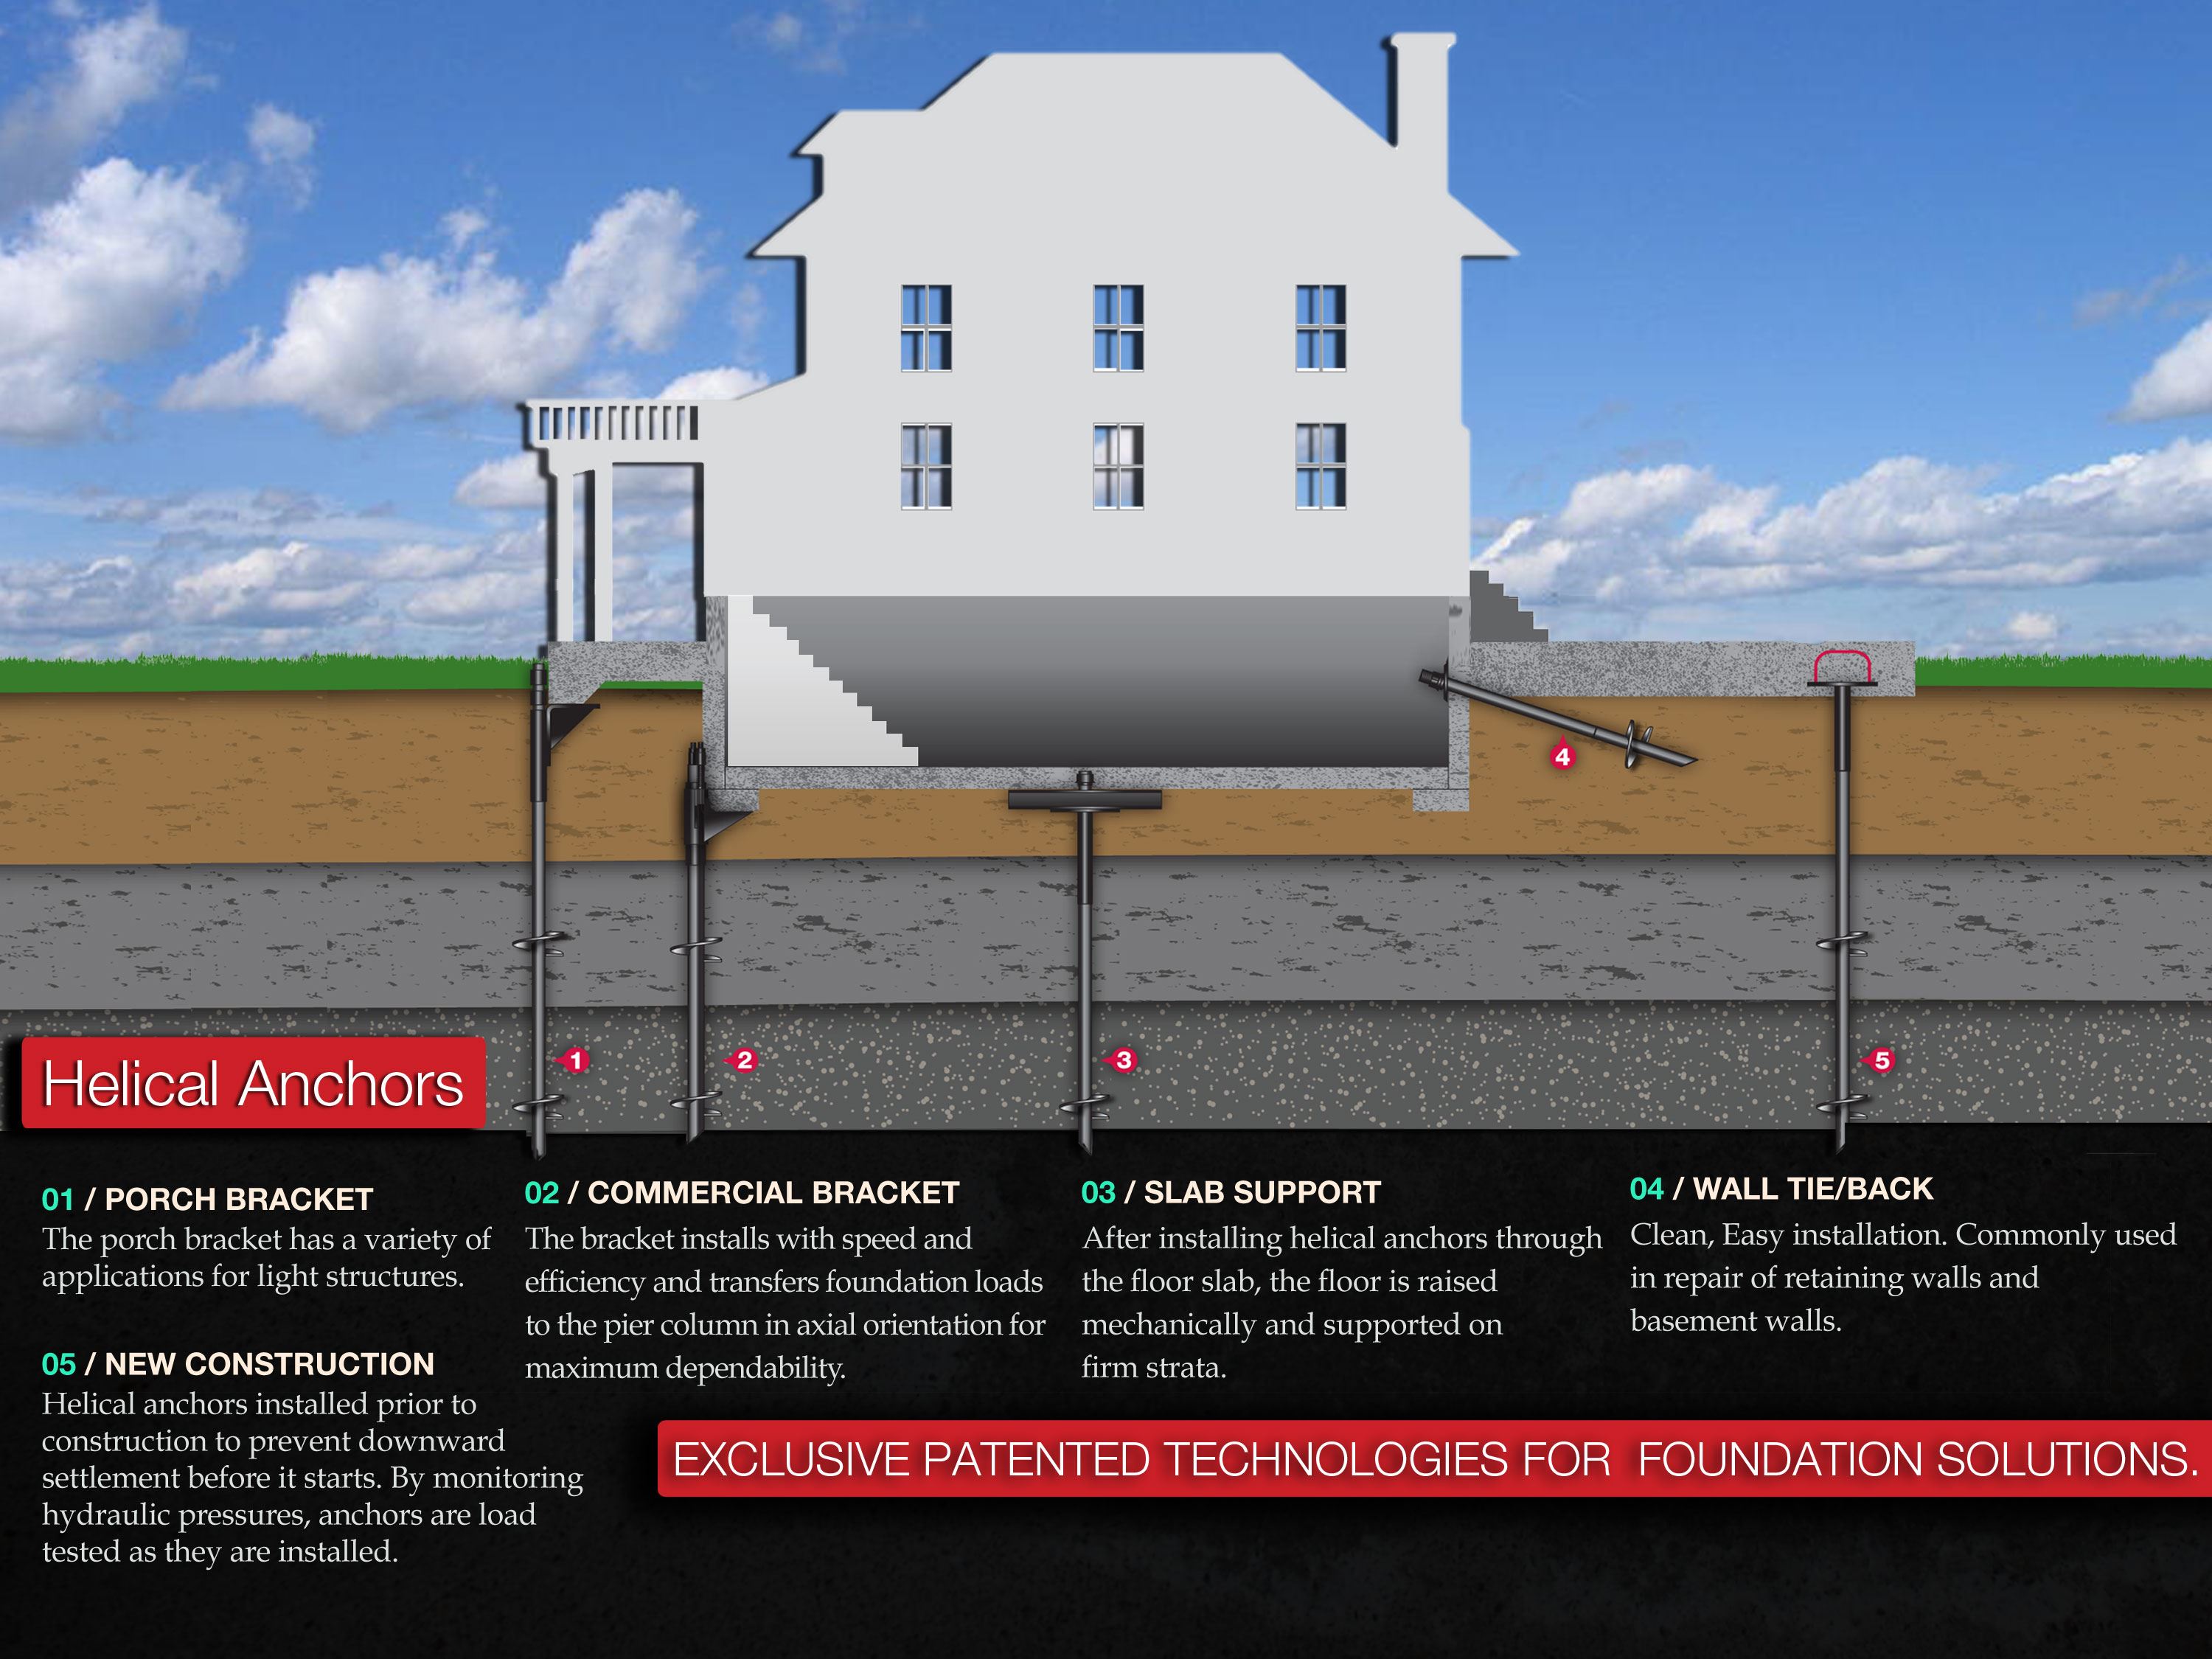 Infographic: Helical anchors for foundation stabilization 